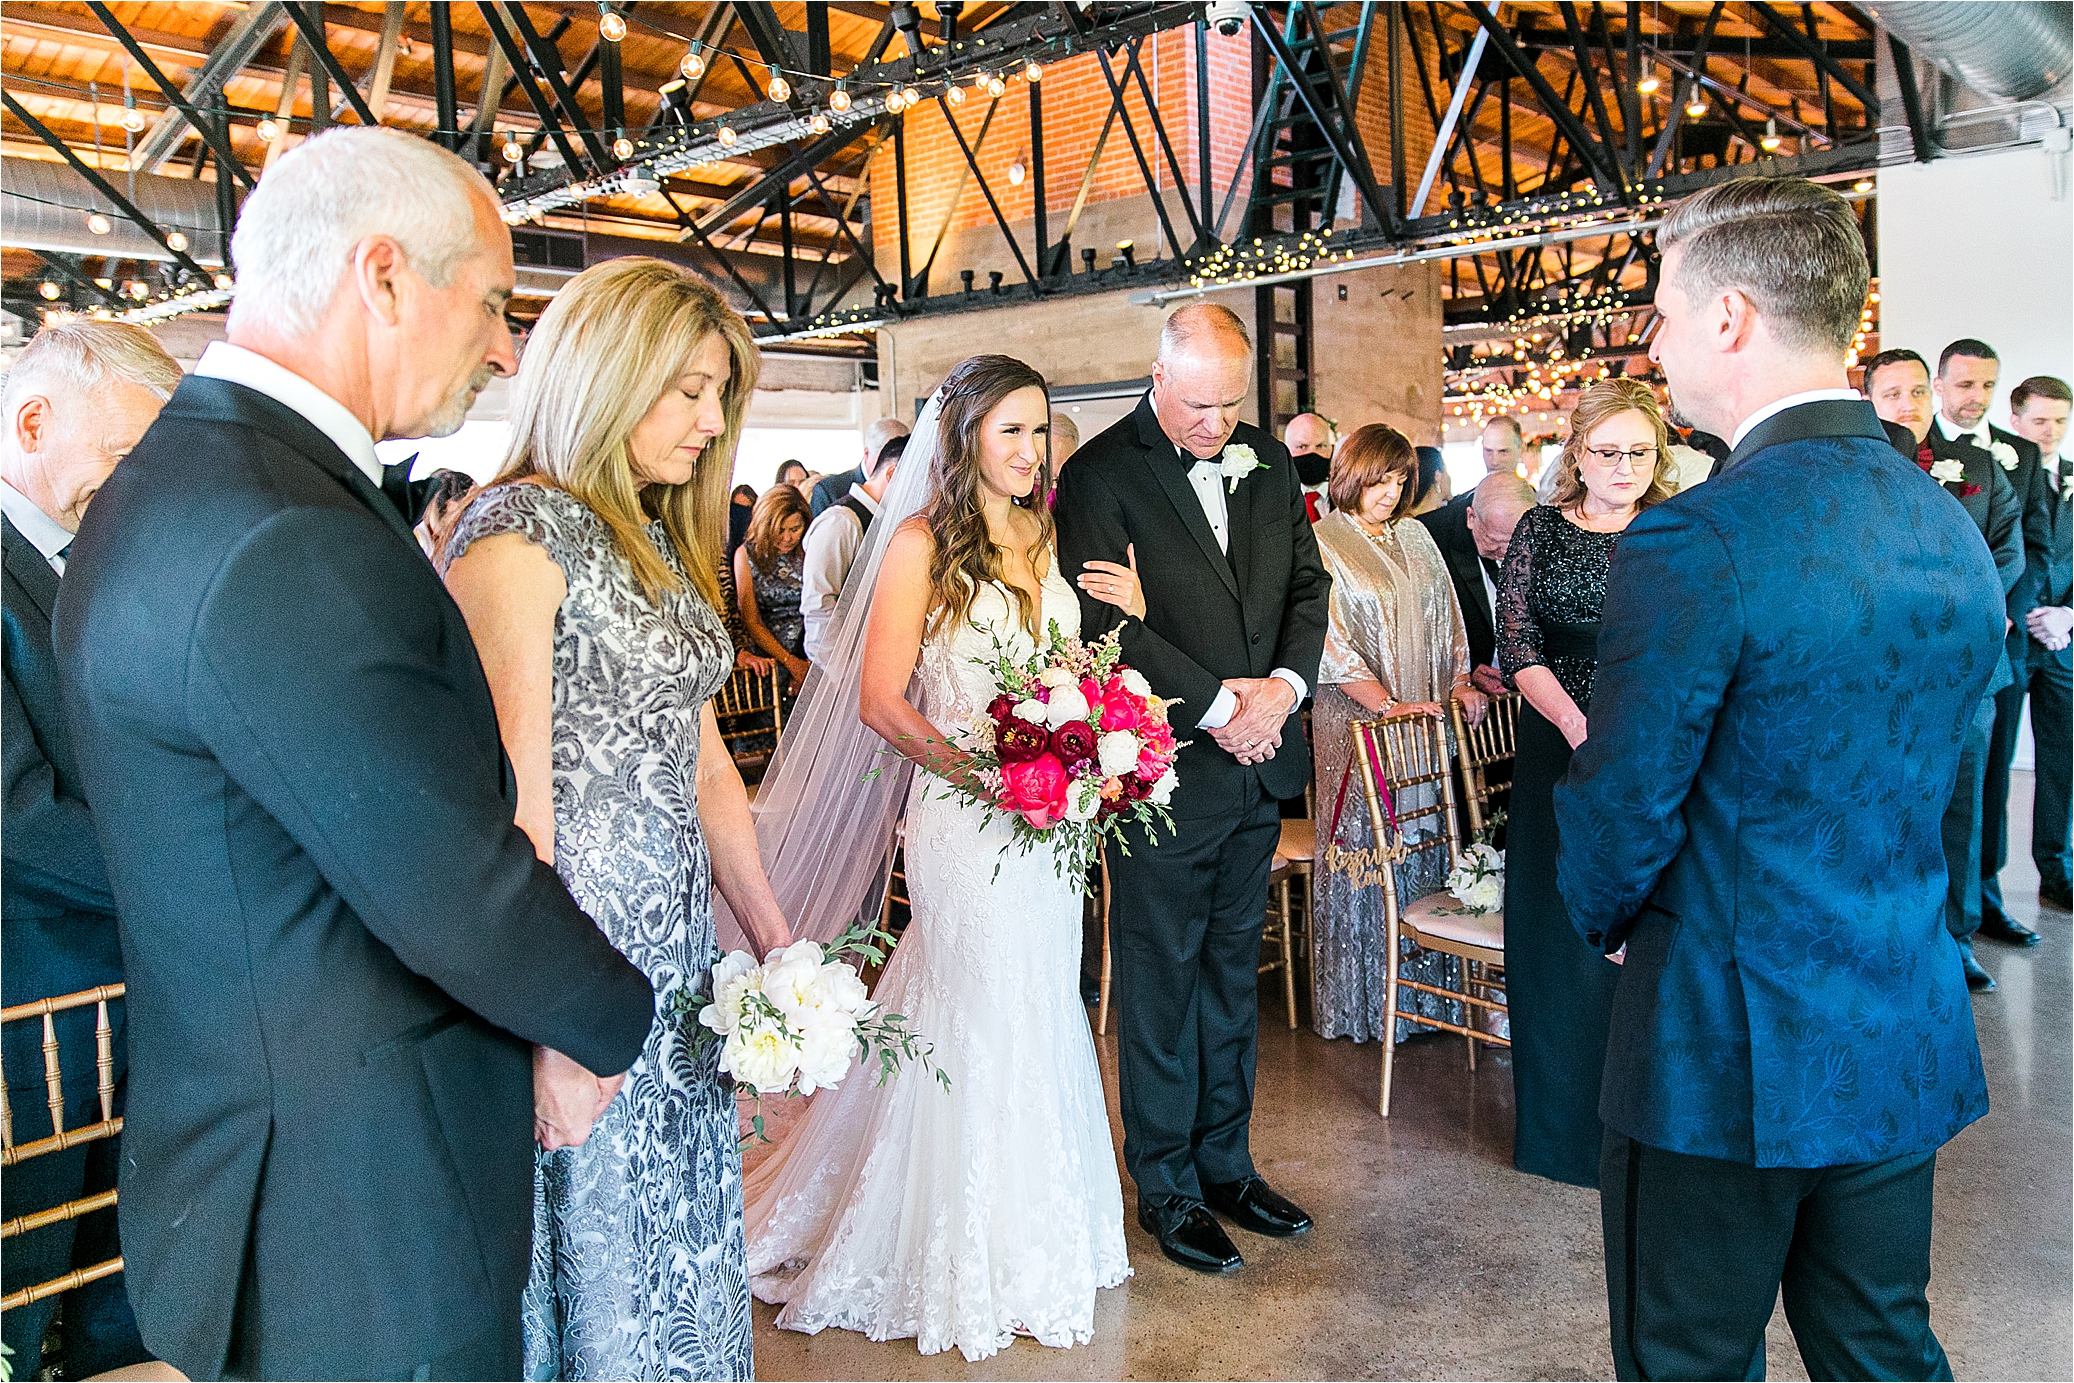 A bride smiles as she meets her groom at the front of the aisle during their wedding ceremony at Hickory Street Annex in Dallas, TX with Wedding Photographer Jillian Hogan 